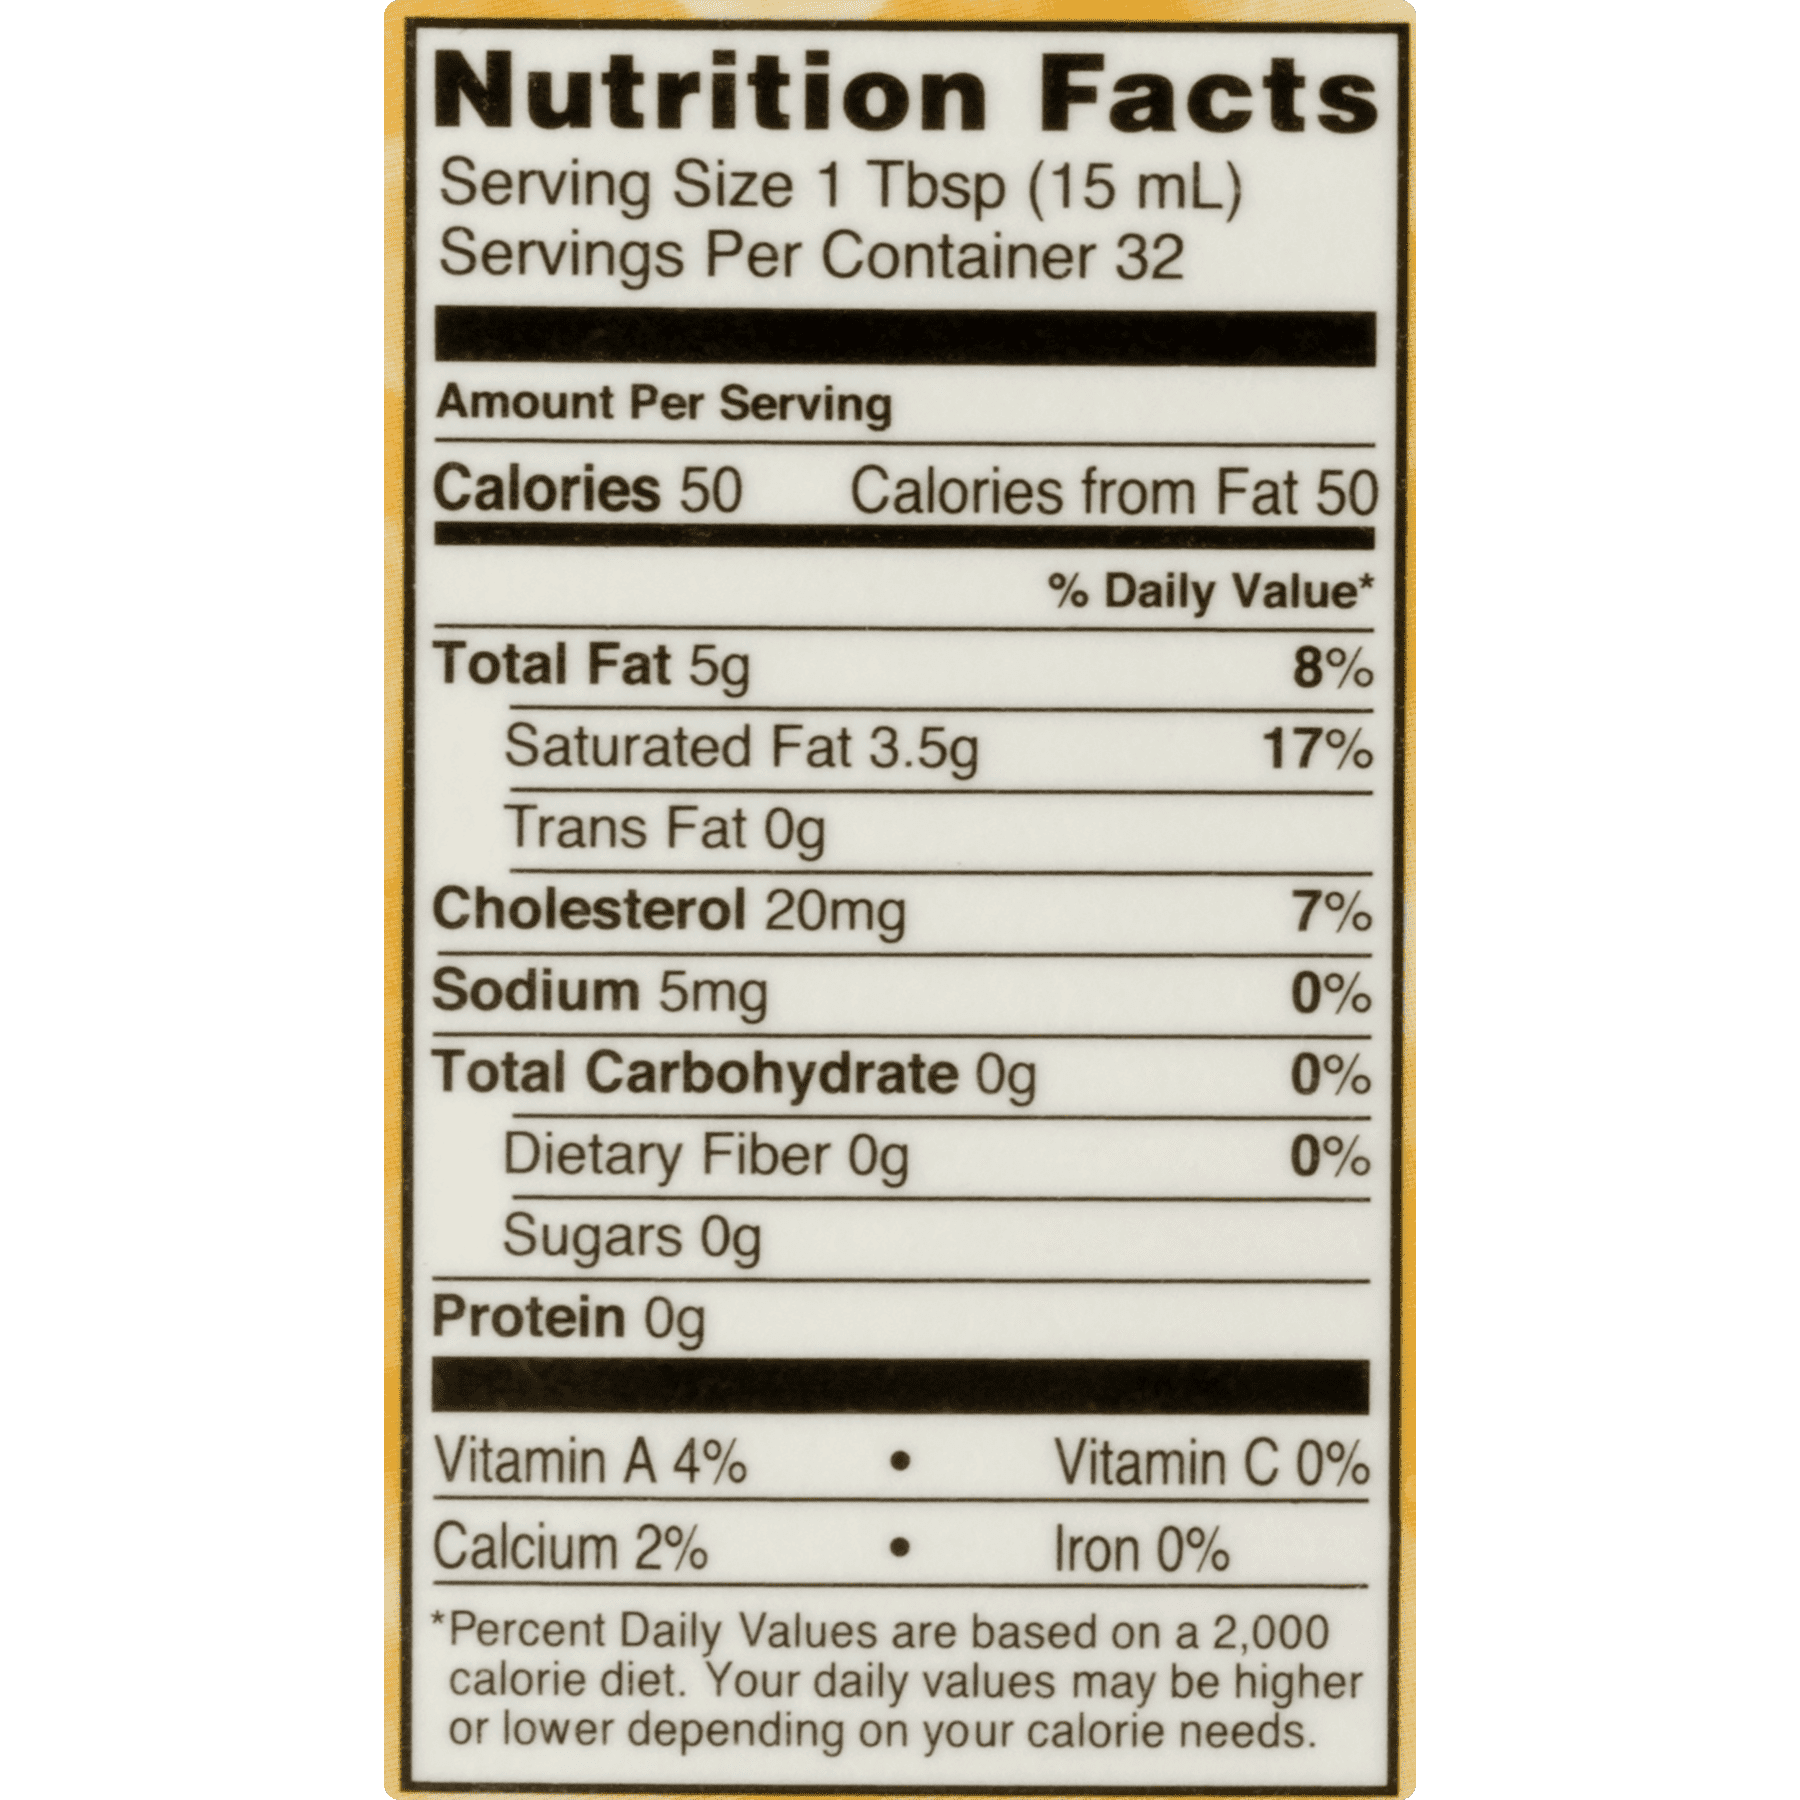 35 Heavy Whipping Cream Nutrition Label - Labels Design Ideas 2020